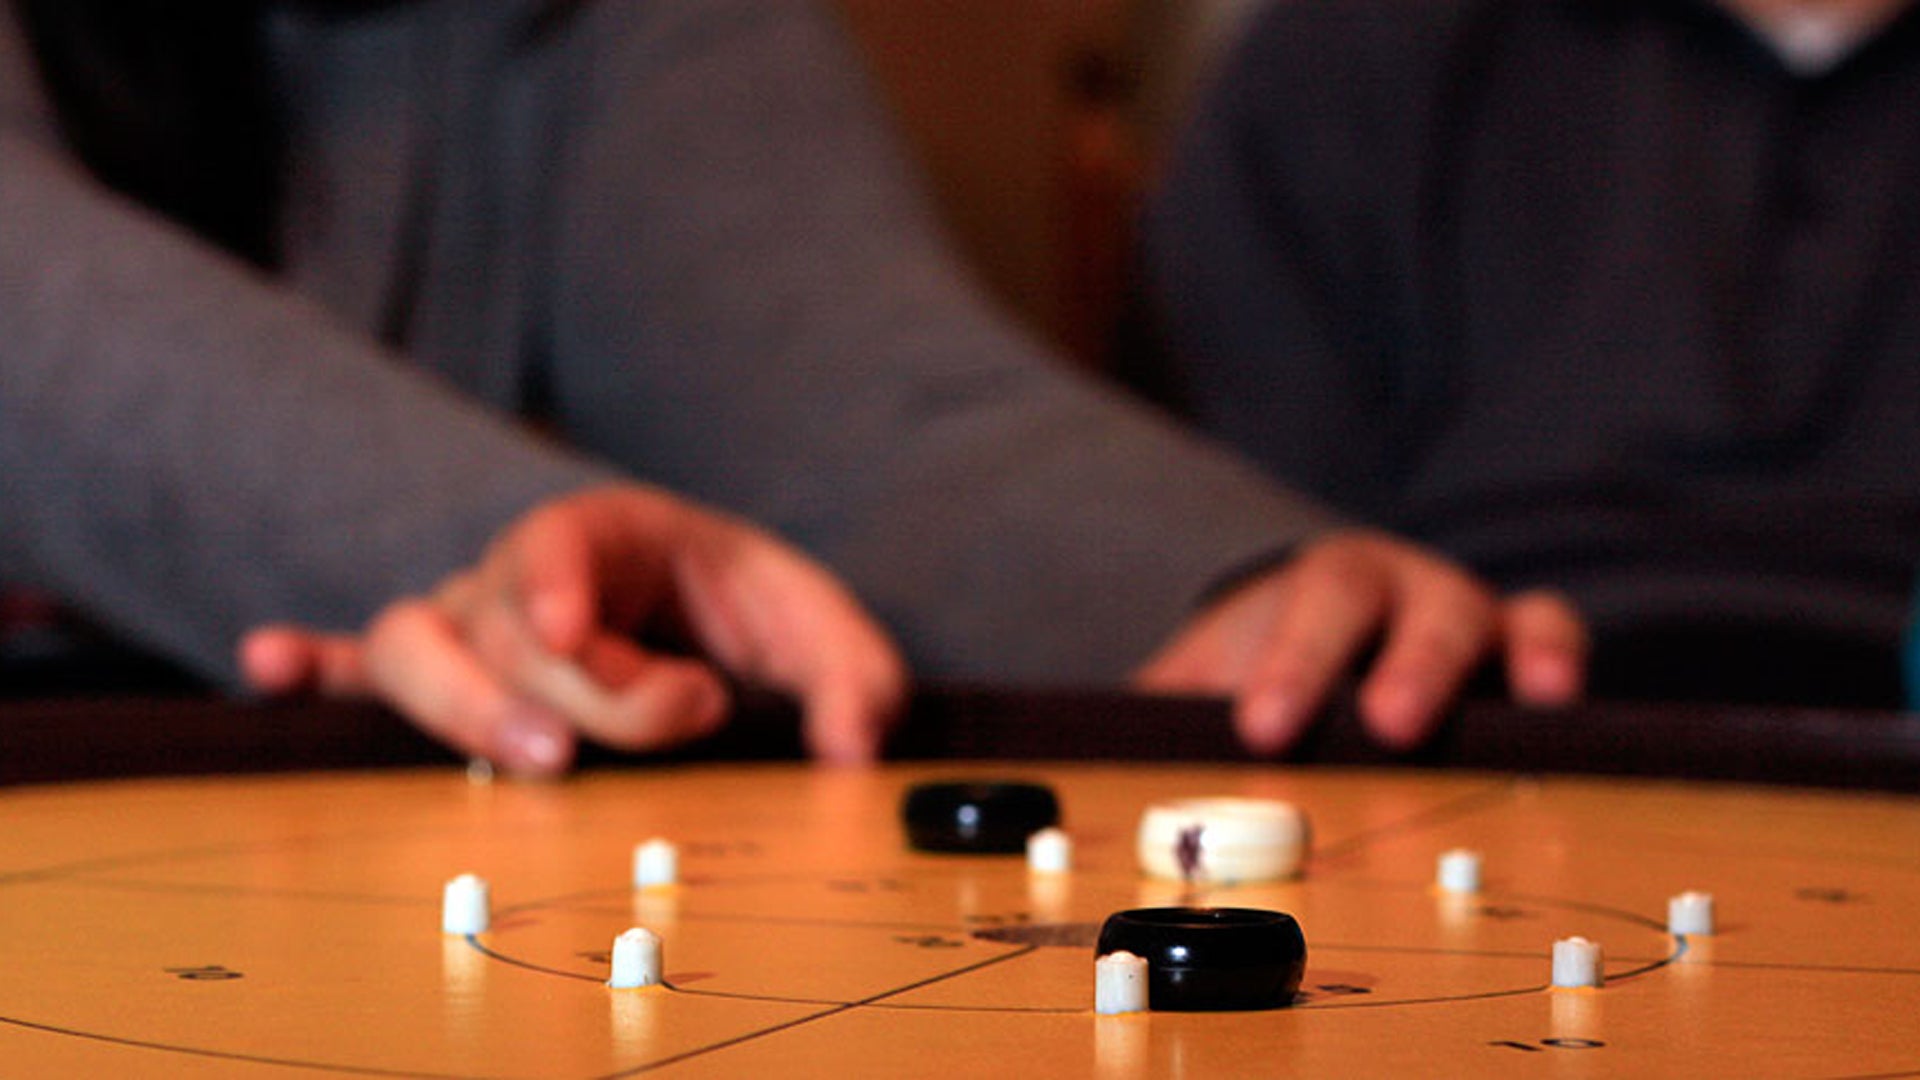 A player takes a shot in dexterity game crokinole